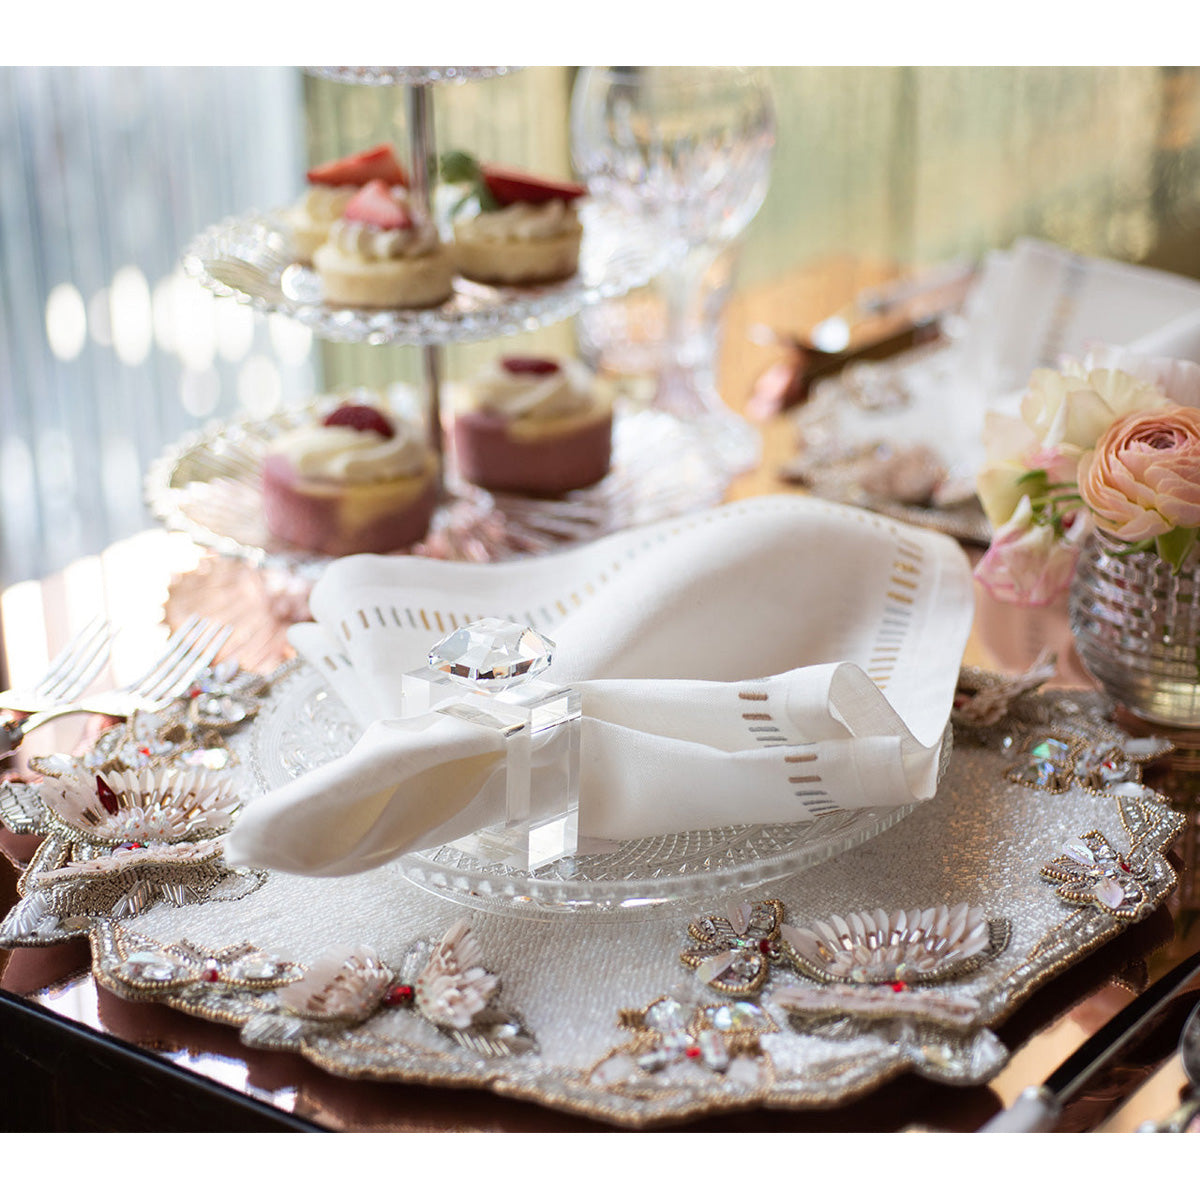 Diamant Butterflies Placemat in White & Blush - Set of 2 in a Gift Box by Kim Seybert Additional Image-2